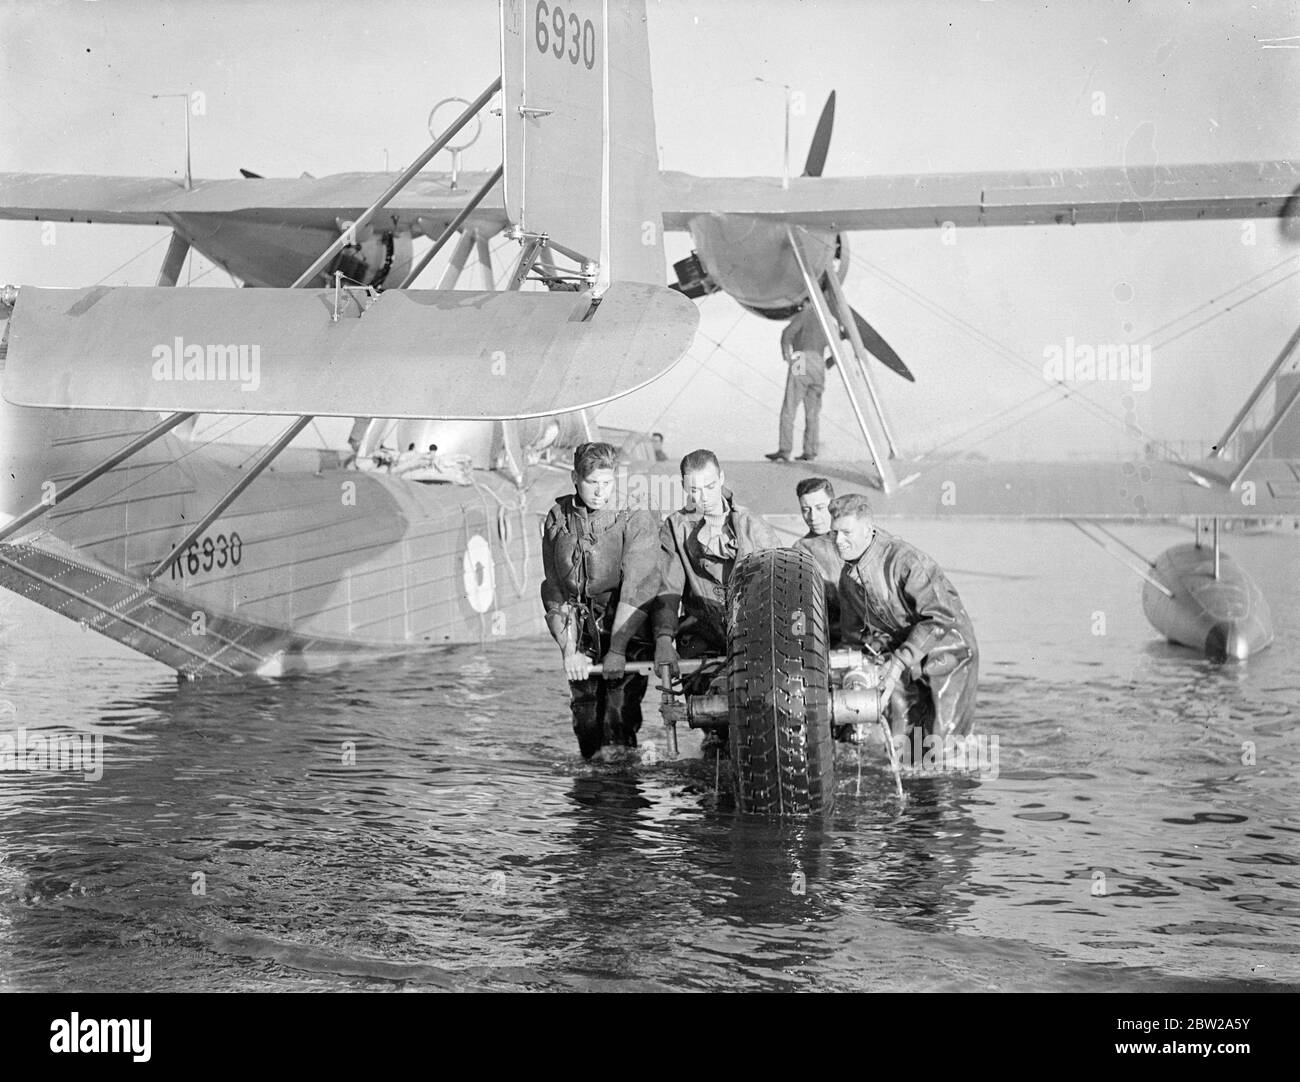 The longest formation flight ever undertaken by service unit, five RAF flying boats of number 204 (Gen reconnaissance) Squadron being prepared at Plymouth. They will take off next week and by the time I return in the Spring, they would have flown 25,000 miles to Australia and back. The visit is being made in connection with the 150th anniversary celebration of Sydney. Photo shows, and bringing ashore one of the drive launching wheels at Plymouth. 26 November 1937 Stock Photo